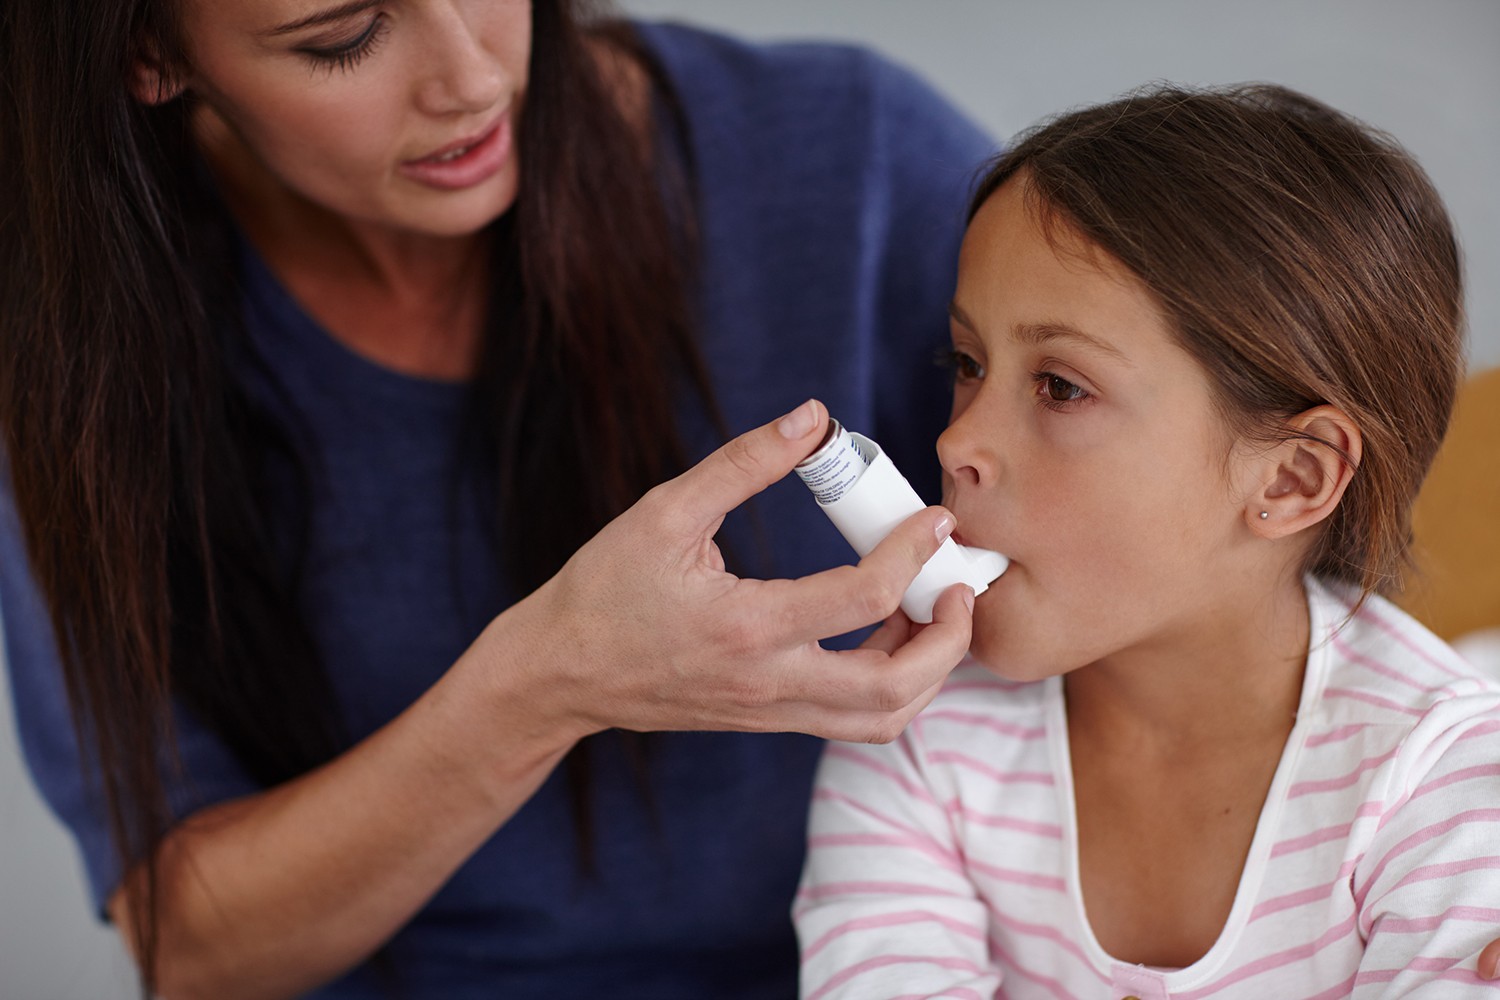 Ask an expert: Management of chronic asthma in children in primary care